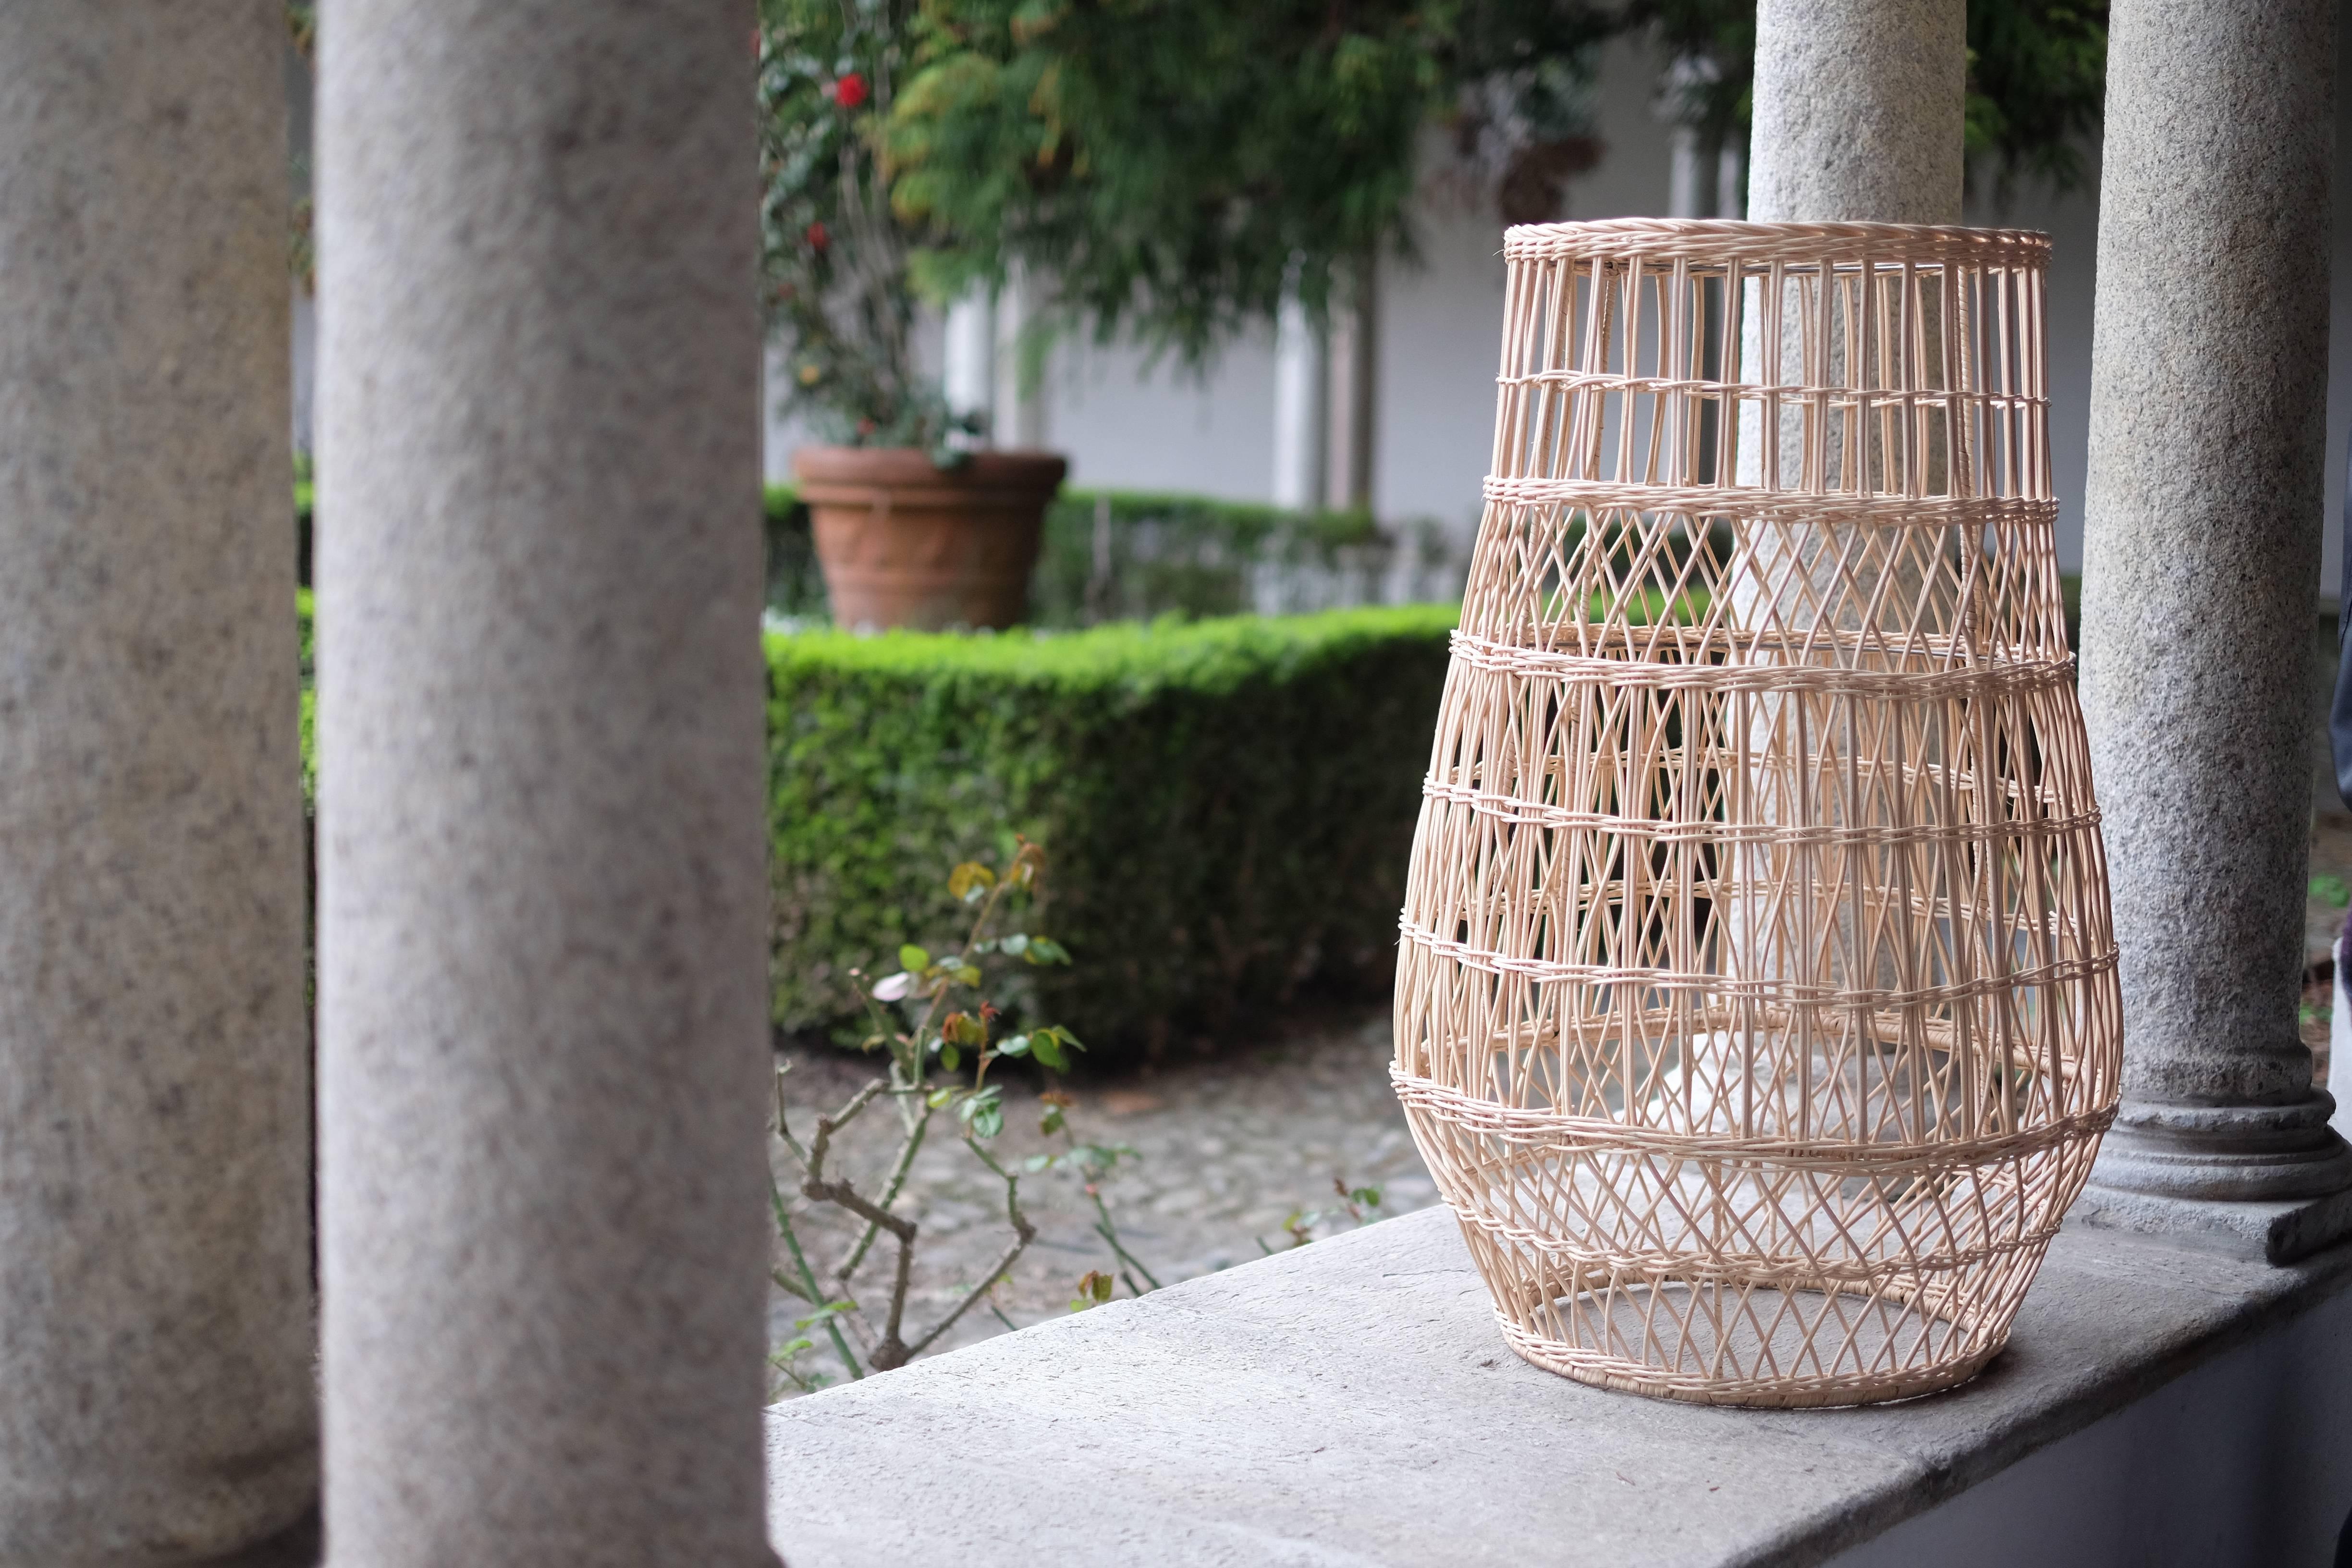 Nasse is a pendant light that draws inspiration from the weaving of fish nets (“nasse” in Italian).
Nasse is the result of the unexpected combination of two different worlds: a rugged raw material such as rattan and the sharp precision of brass